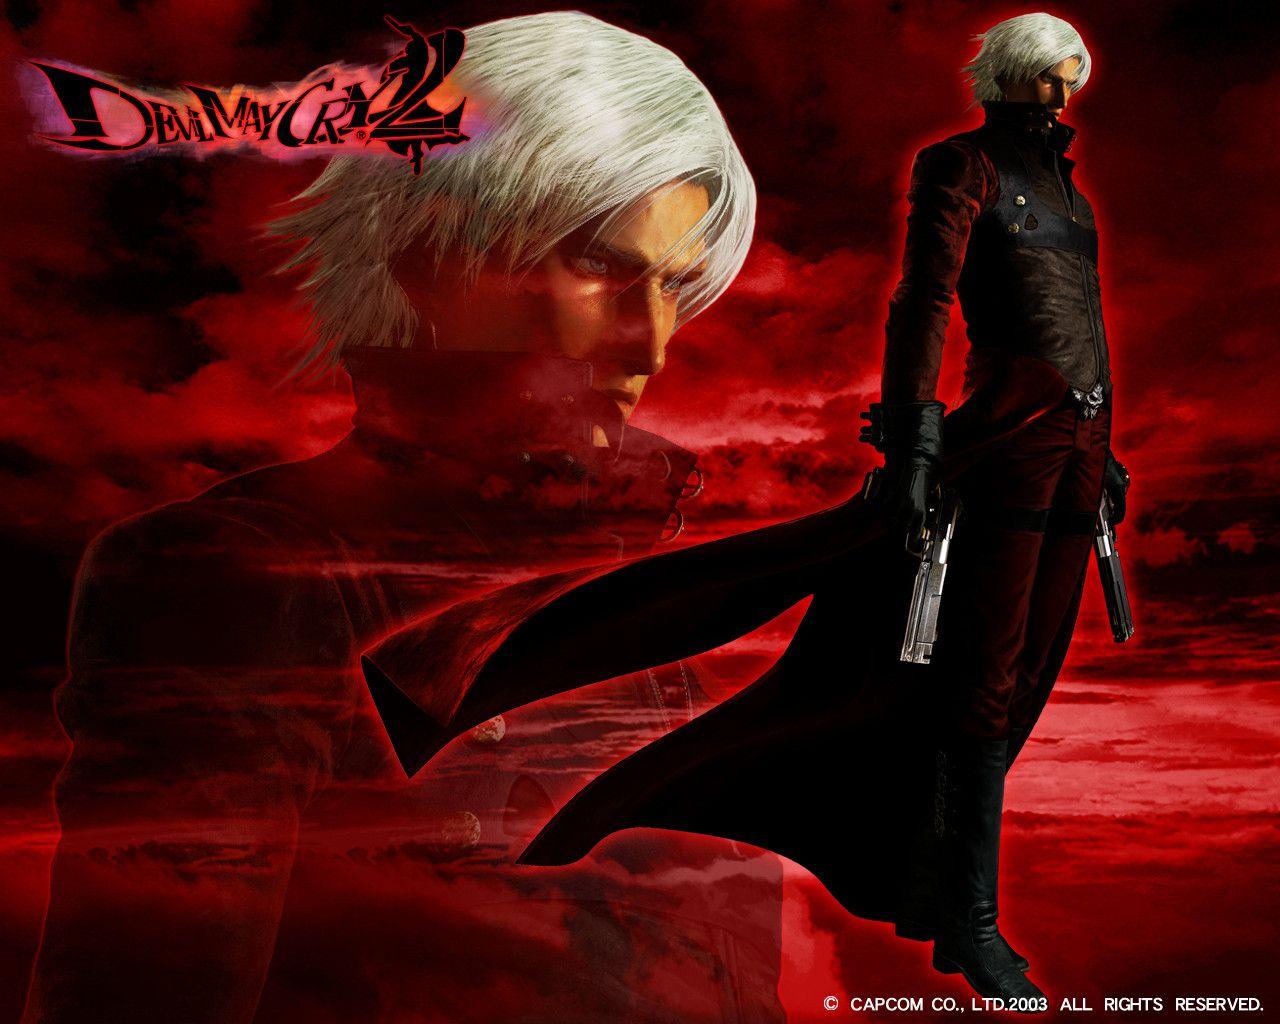 devil may cry 2 pc